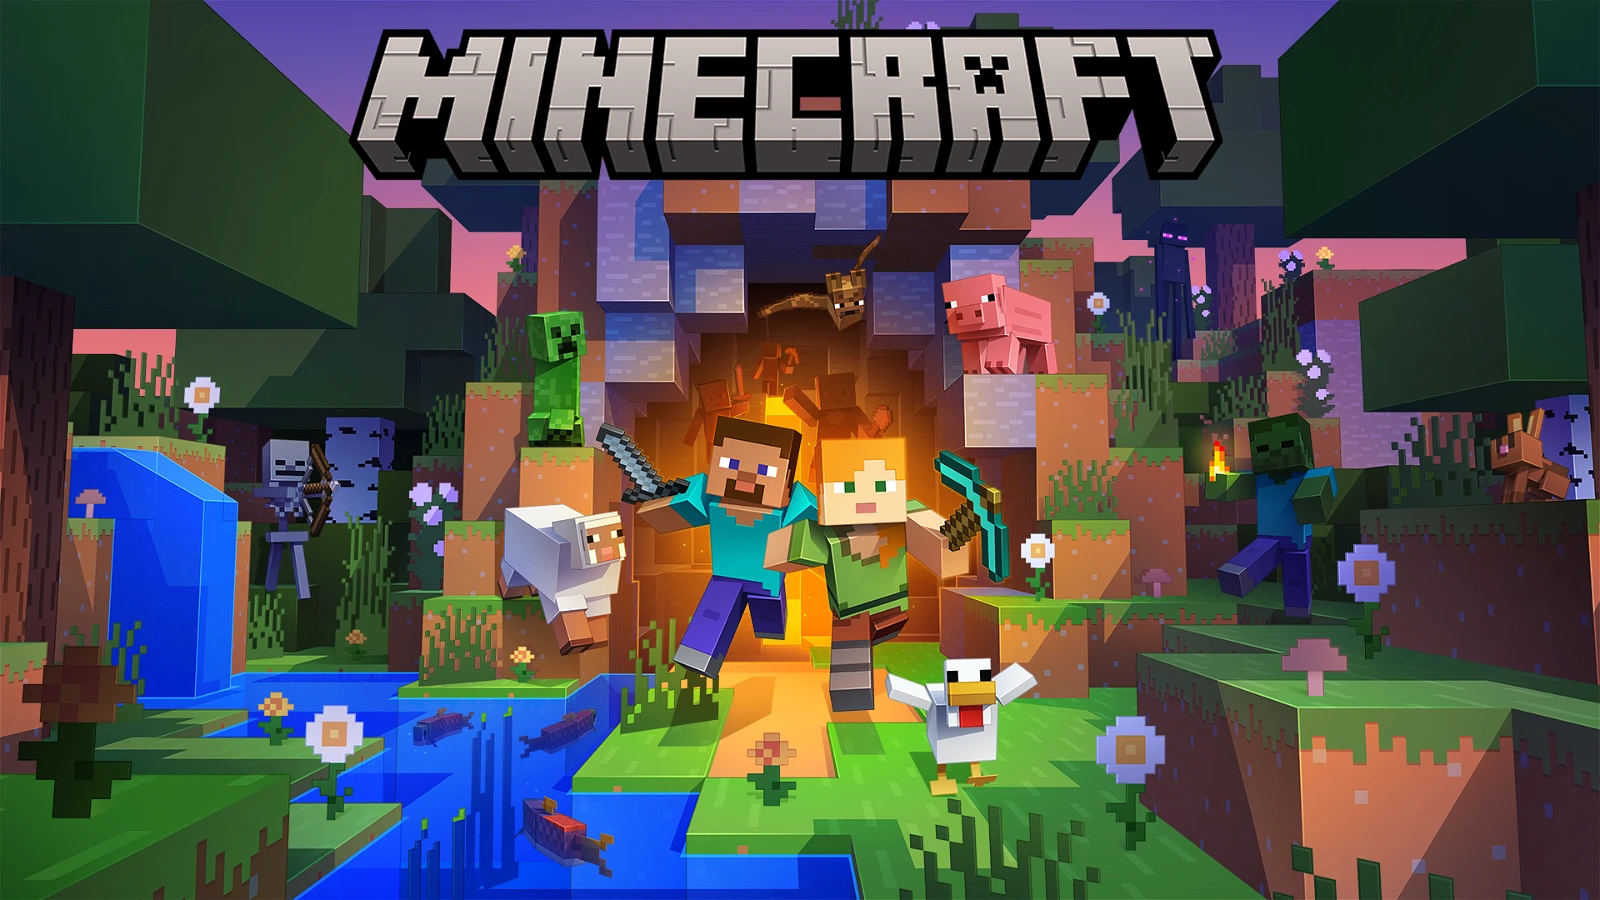 Minecraft has sold 238 million copies and is one of the biggest video games of all time, despite being originally developed as an indie game.